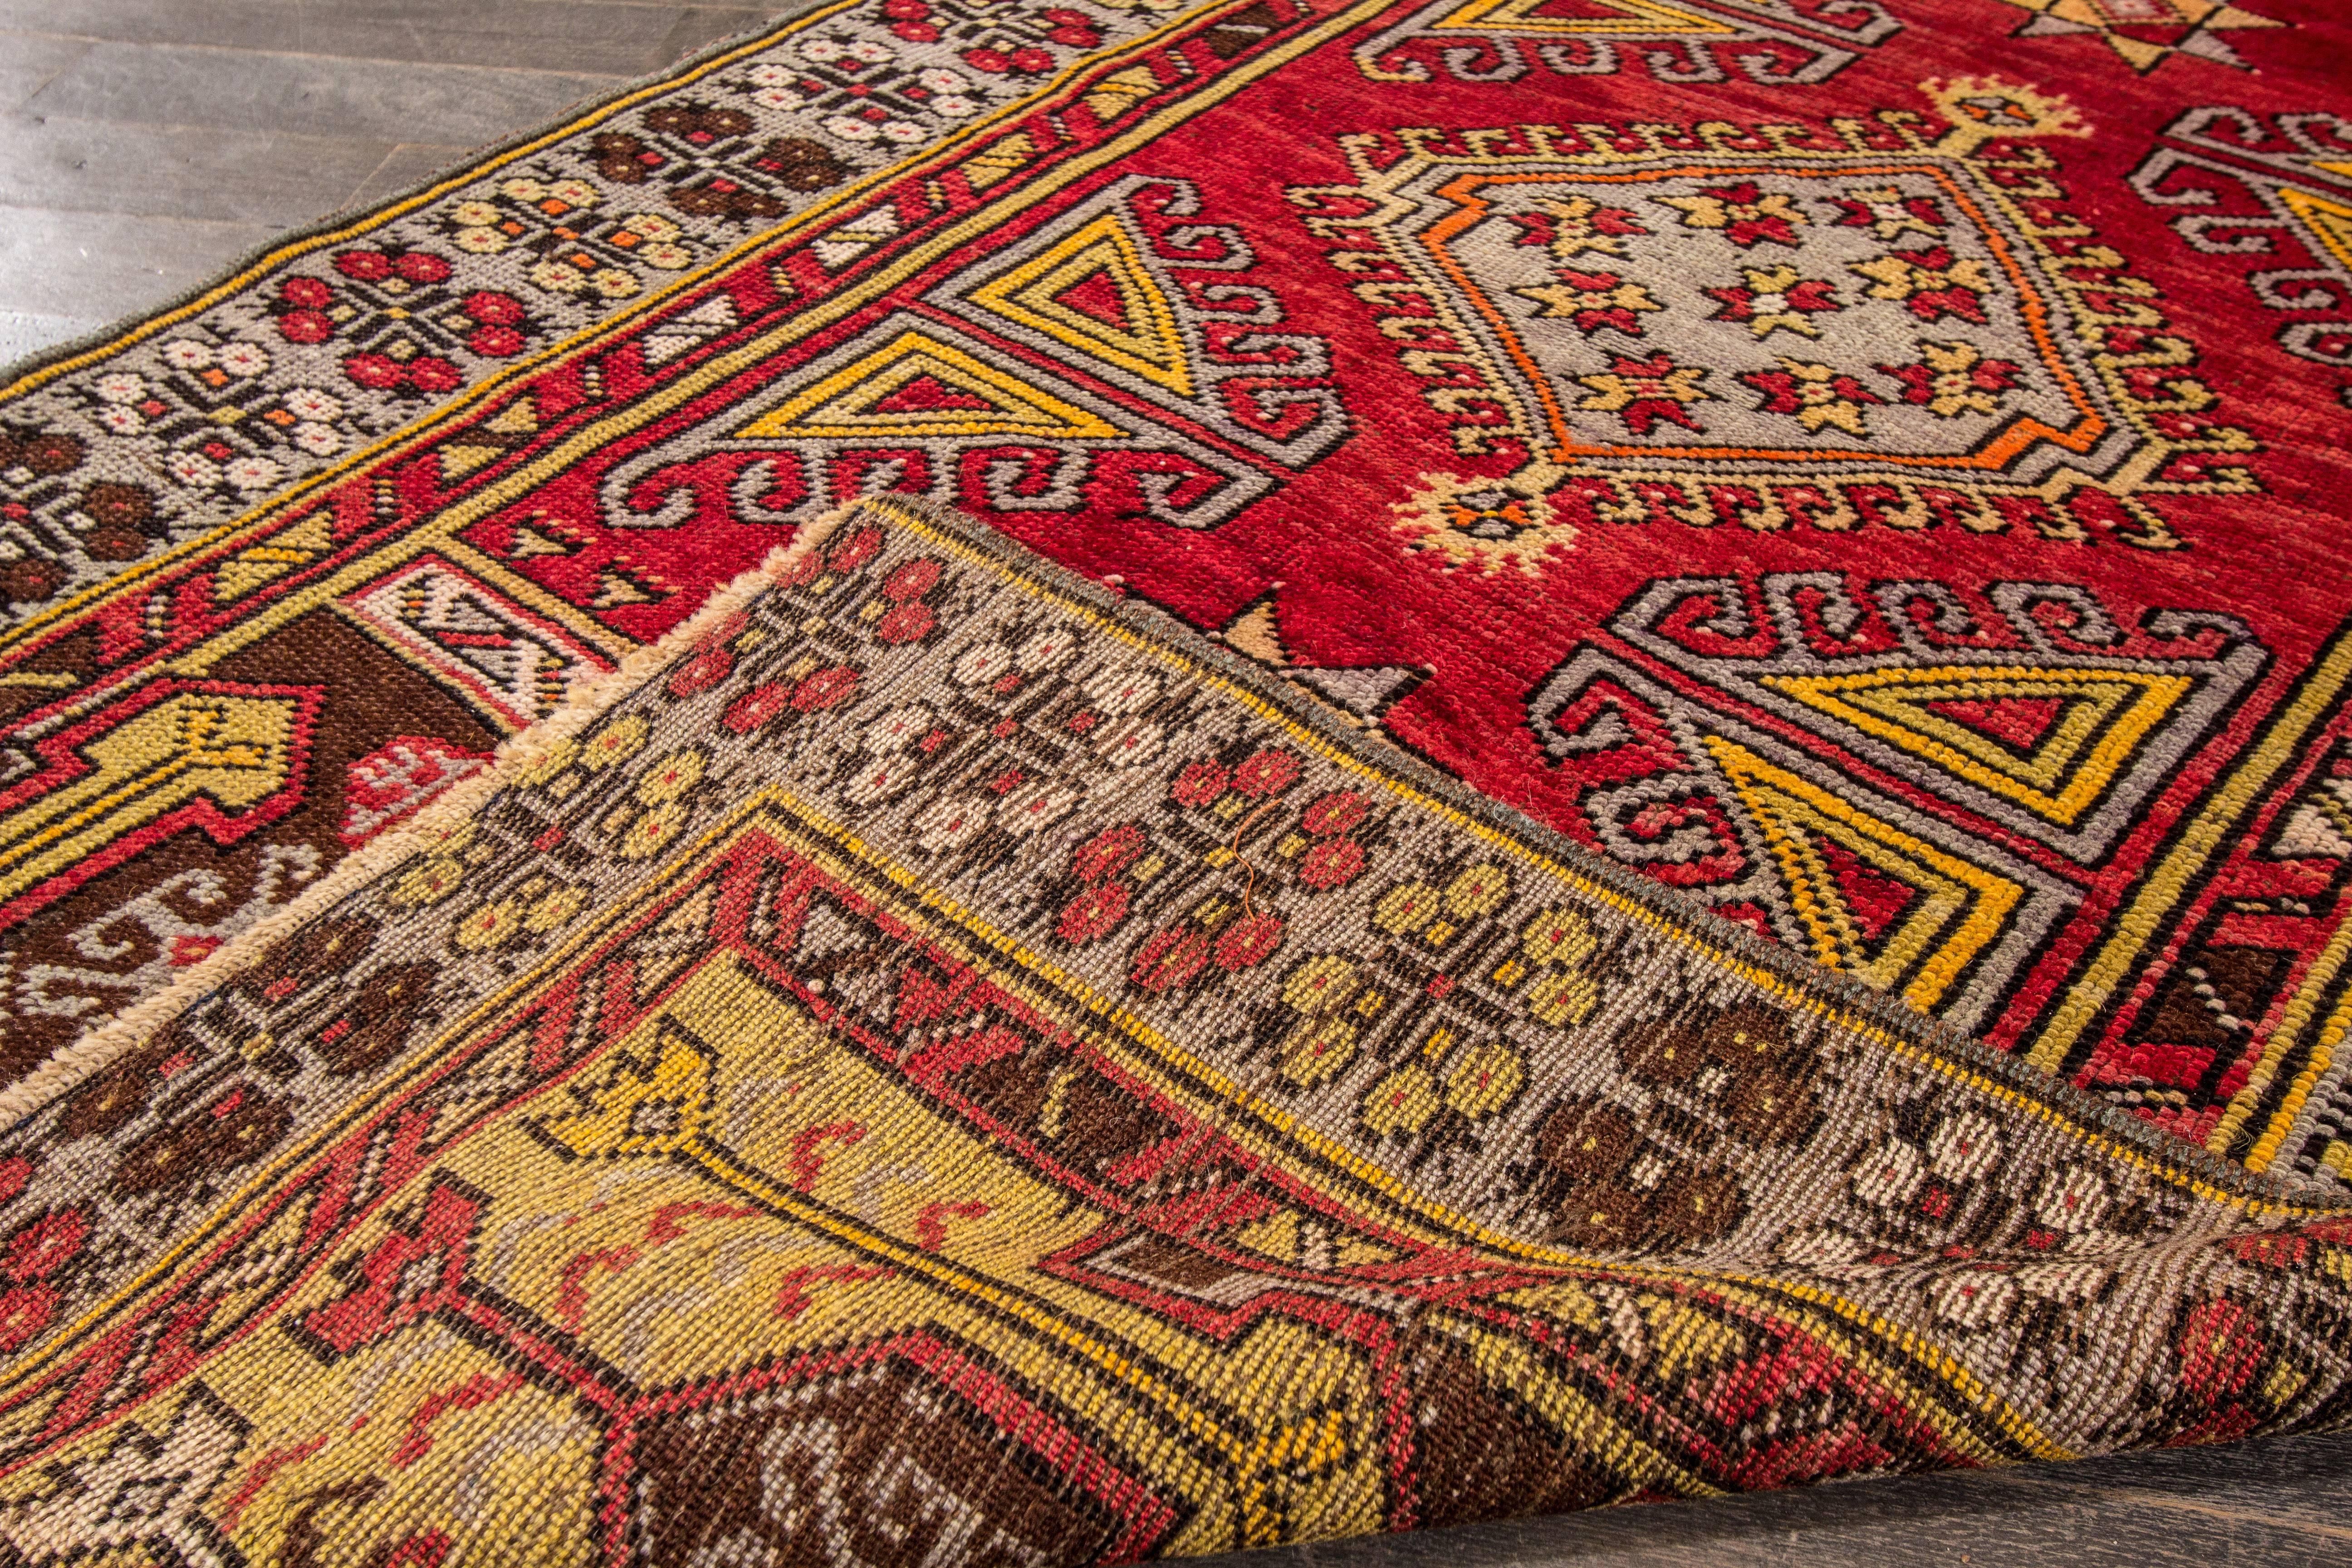 Hand knotted rug with a geometric and medallion design on a red field with gray borders. Measures: 3'2' x 5'9